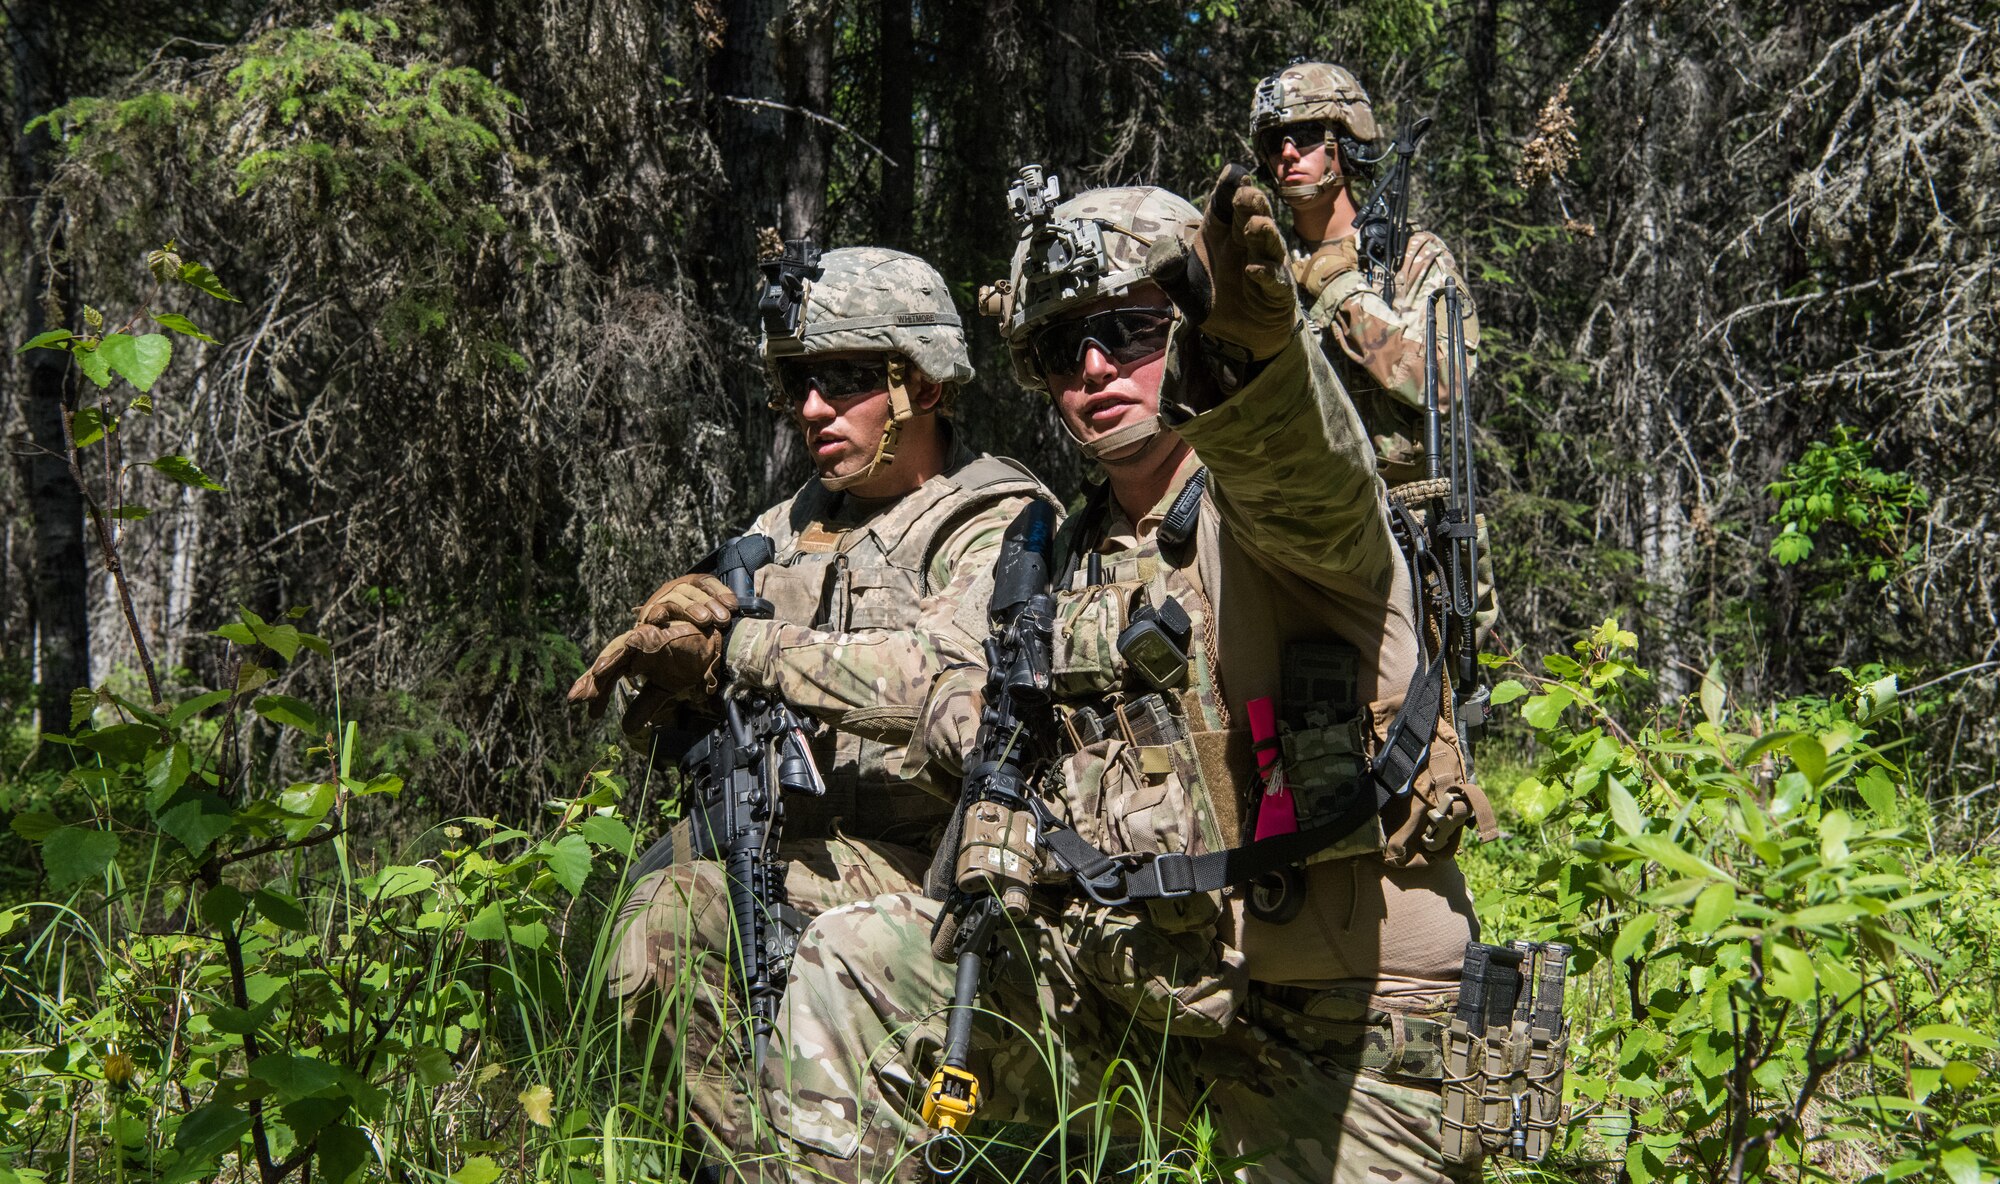 U.S. Army Alaska infantrymen from the 1st Stryker Brigade Combat Team, 25th Infantry Division, and Japan Ground Self-Defense Force soldiers from the 1st Airborne Brigade
execute platoon movement-to-contact and support-by-fire operations during Exercise Arctic Aurora at Joint Base Elmendorf-Richardson, Alaska, June 14, 2018. Arctic Aurora is an annual bilateral training exercise involving elements of U.S. Army Alaska and the JGSDF which focuses on strengthening ties between the two nations by executing combined small-unit airborne proficiency operations and basic small-arms marksmanship.